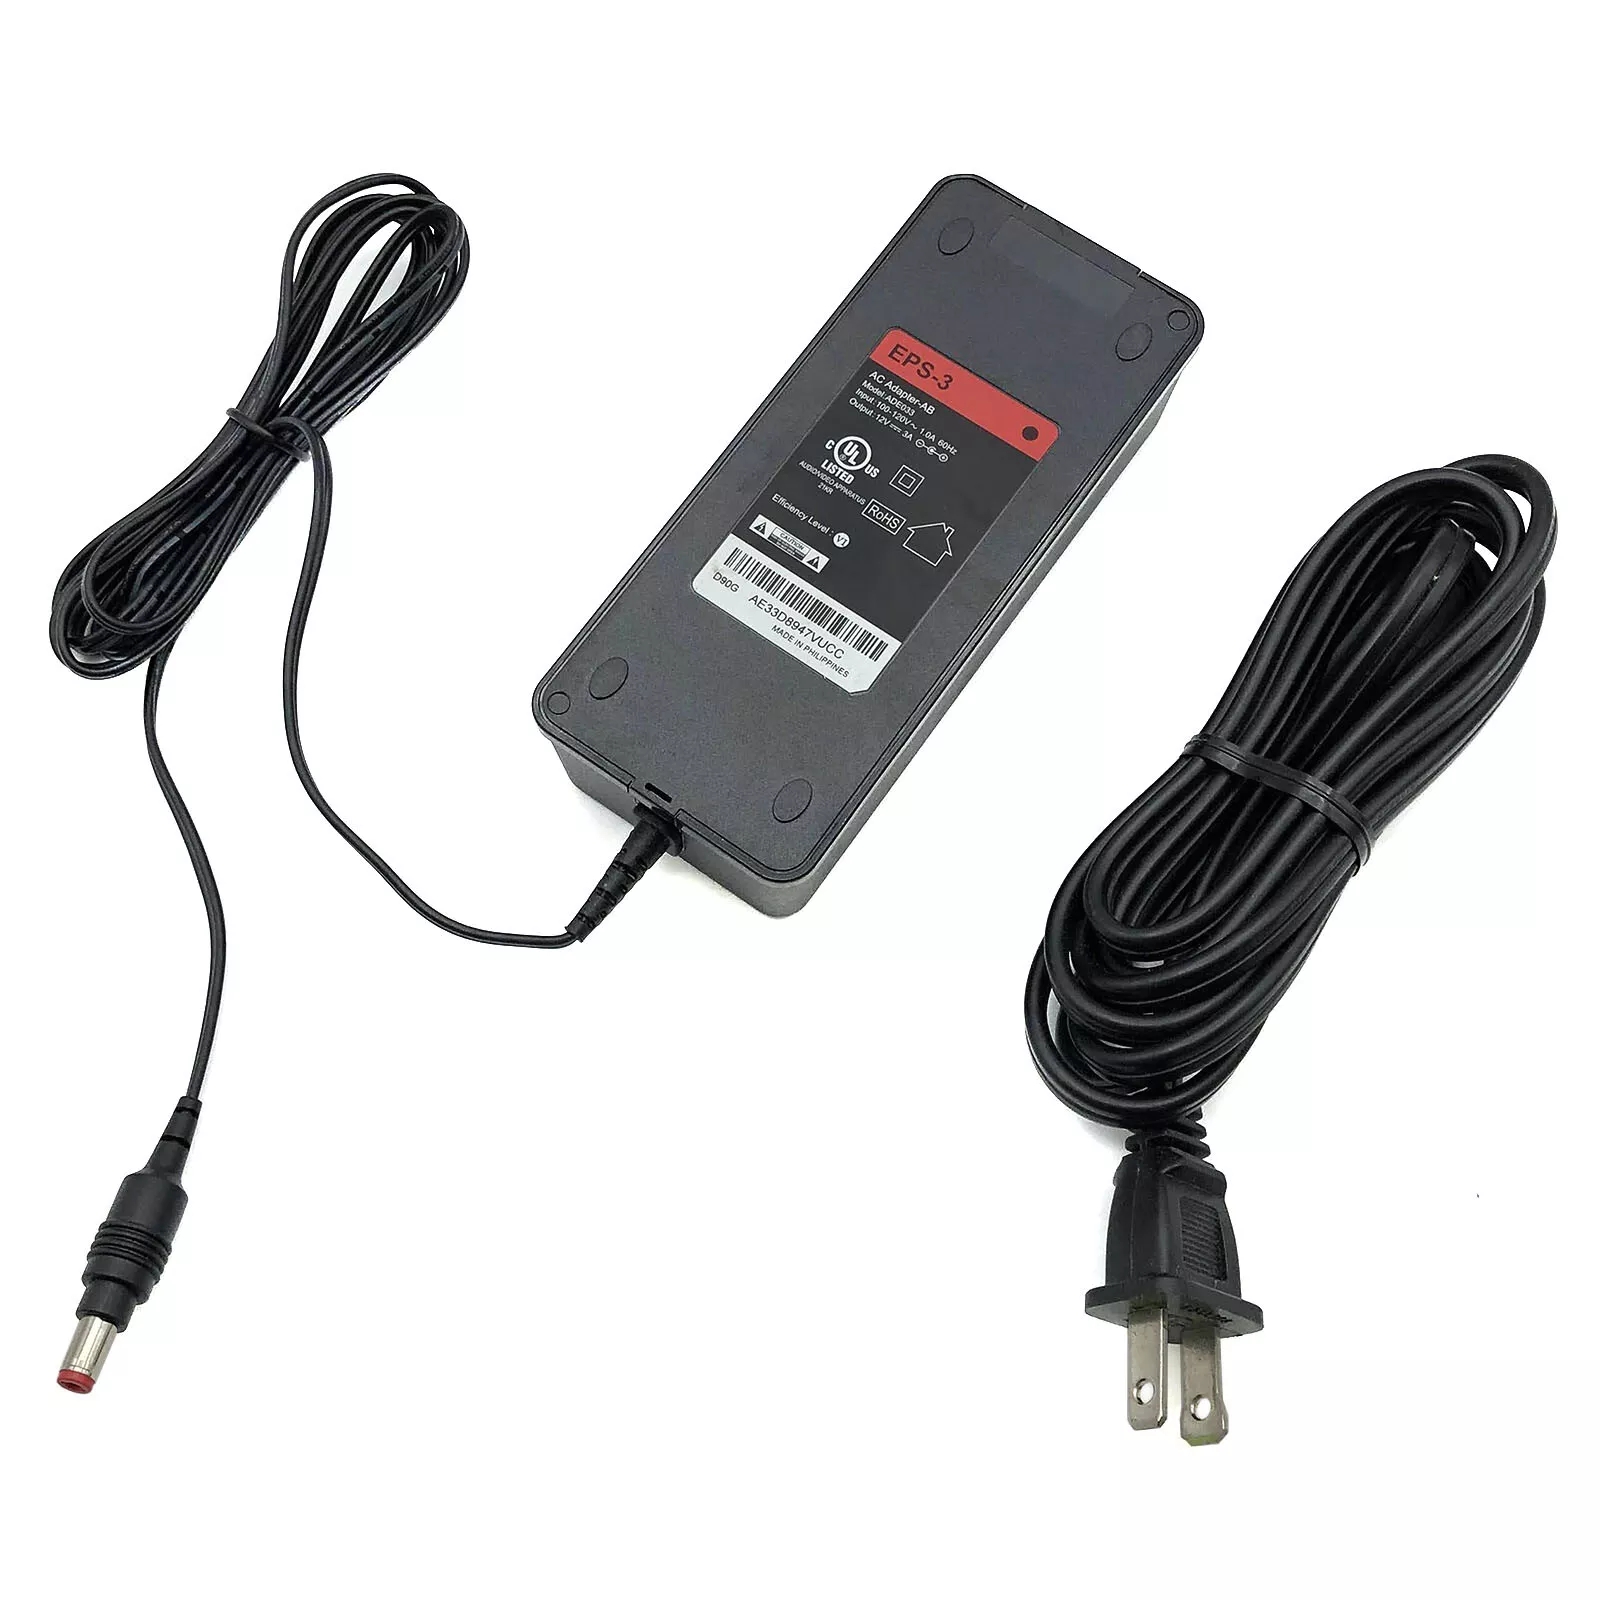 *Brand NEW*Genuine 36W AcBel 12V 3A AC DC Adapter EPS-3 Model ADE033 w/Cord Power Supply - Click Image to Close